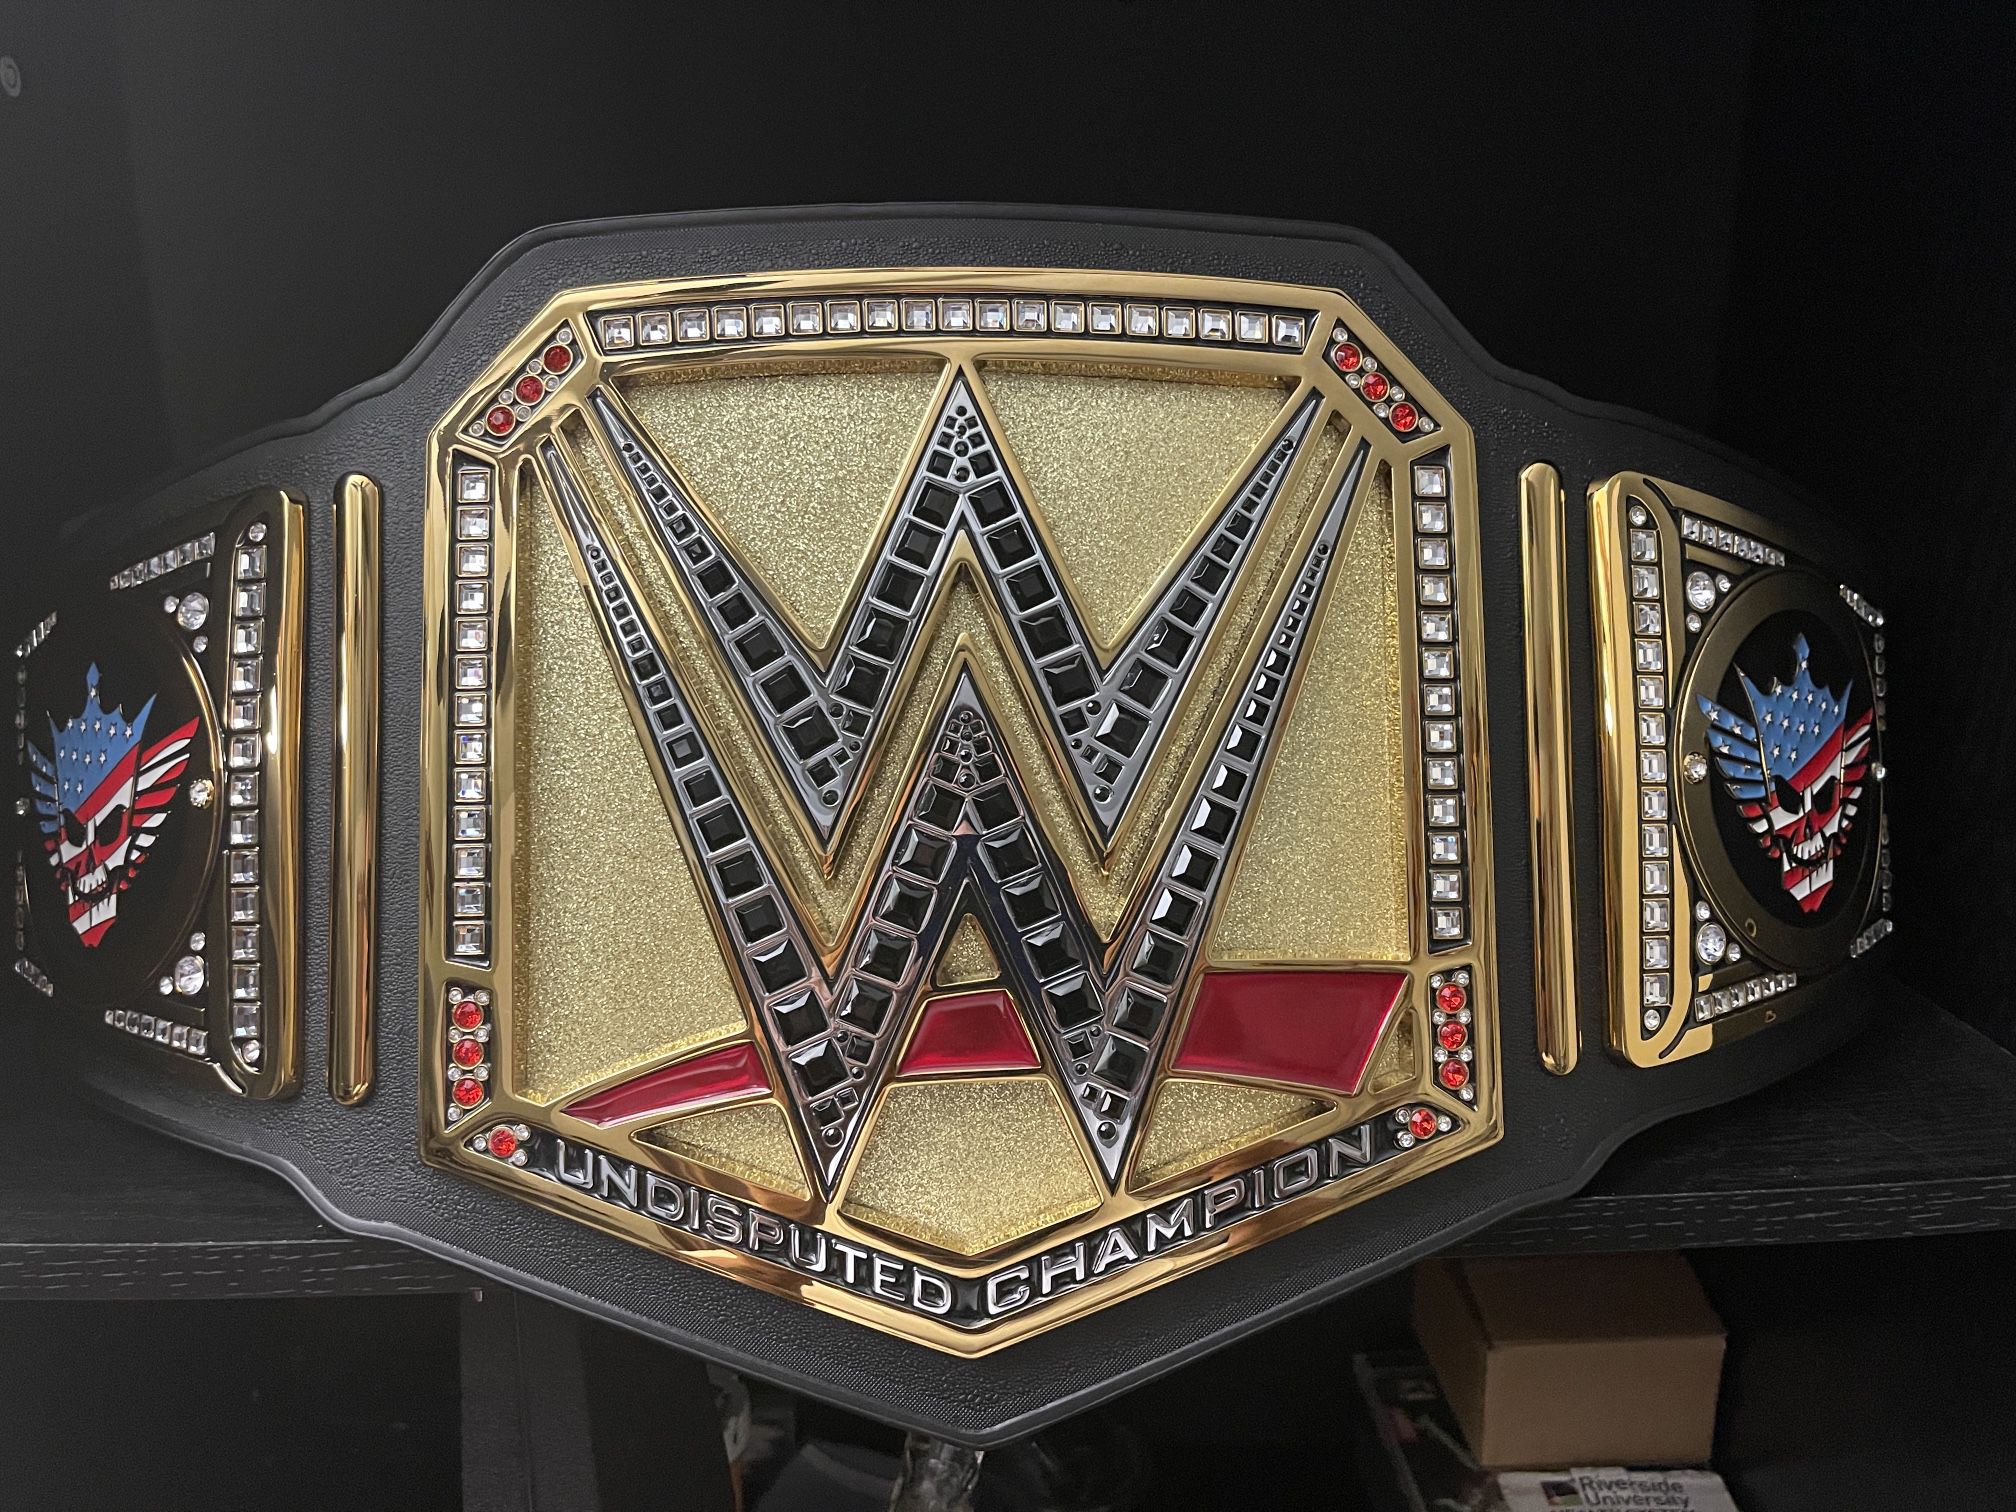 Wwe Undisputed Championship With Cody Rhodes side Plates